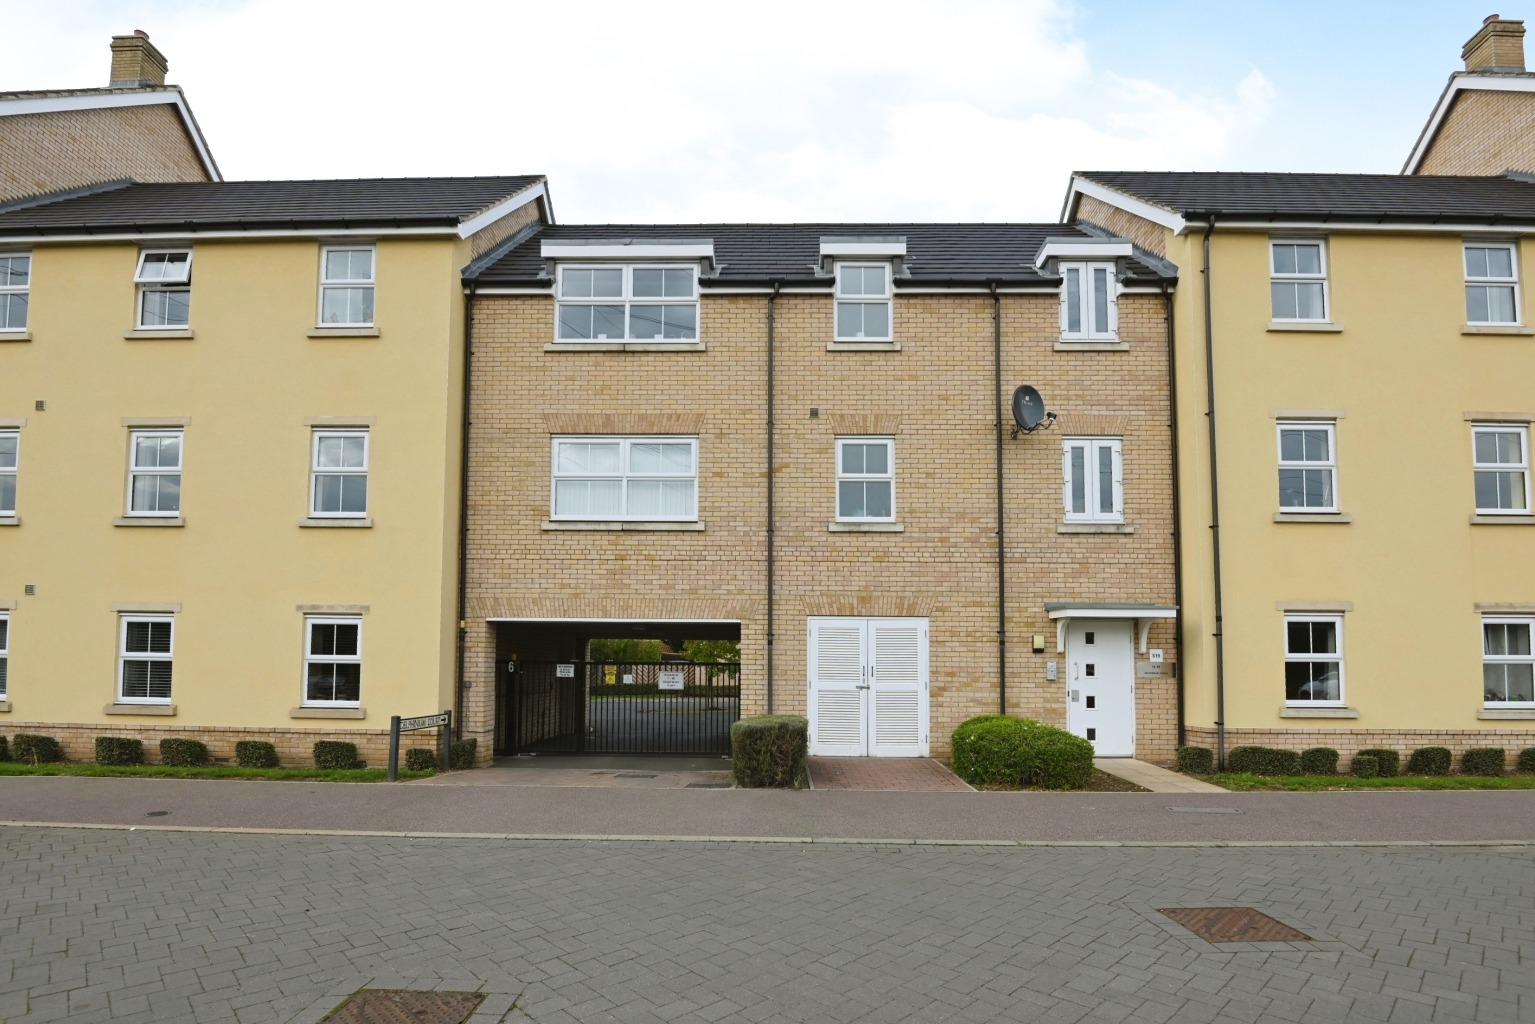 1 bed flat for sale in Delphinium Court, St Neots - Property Image 1